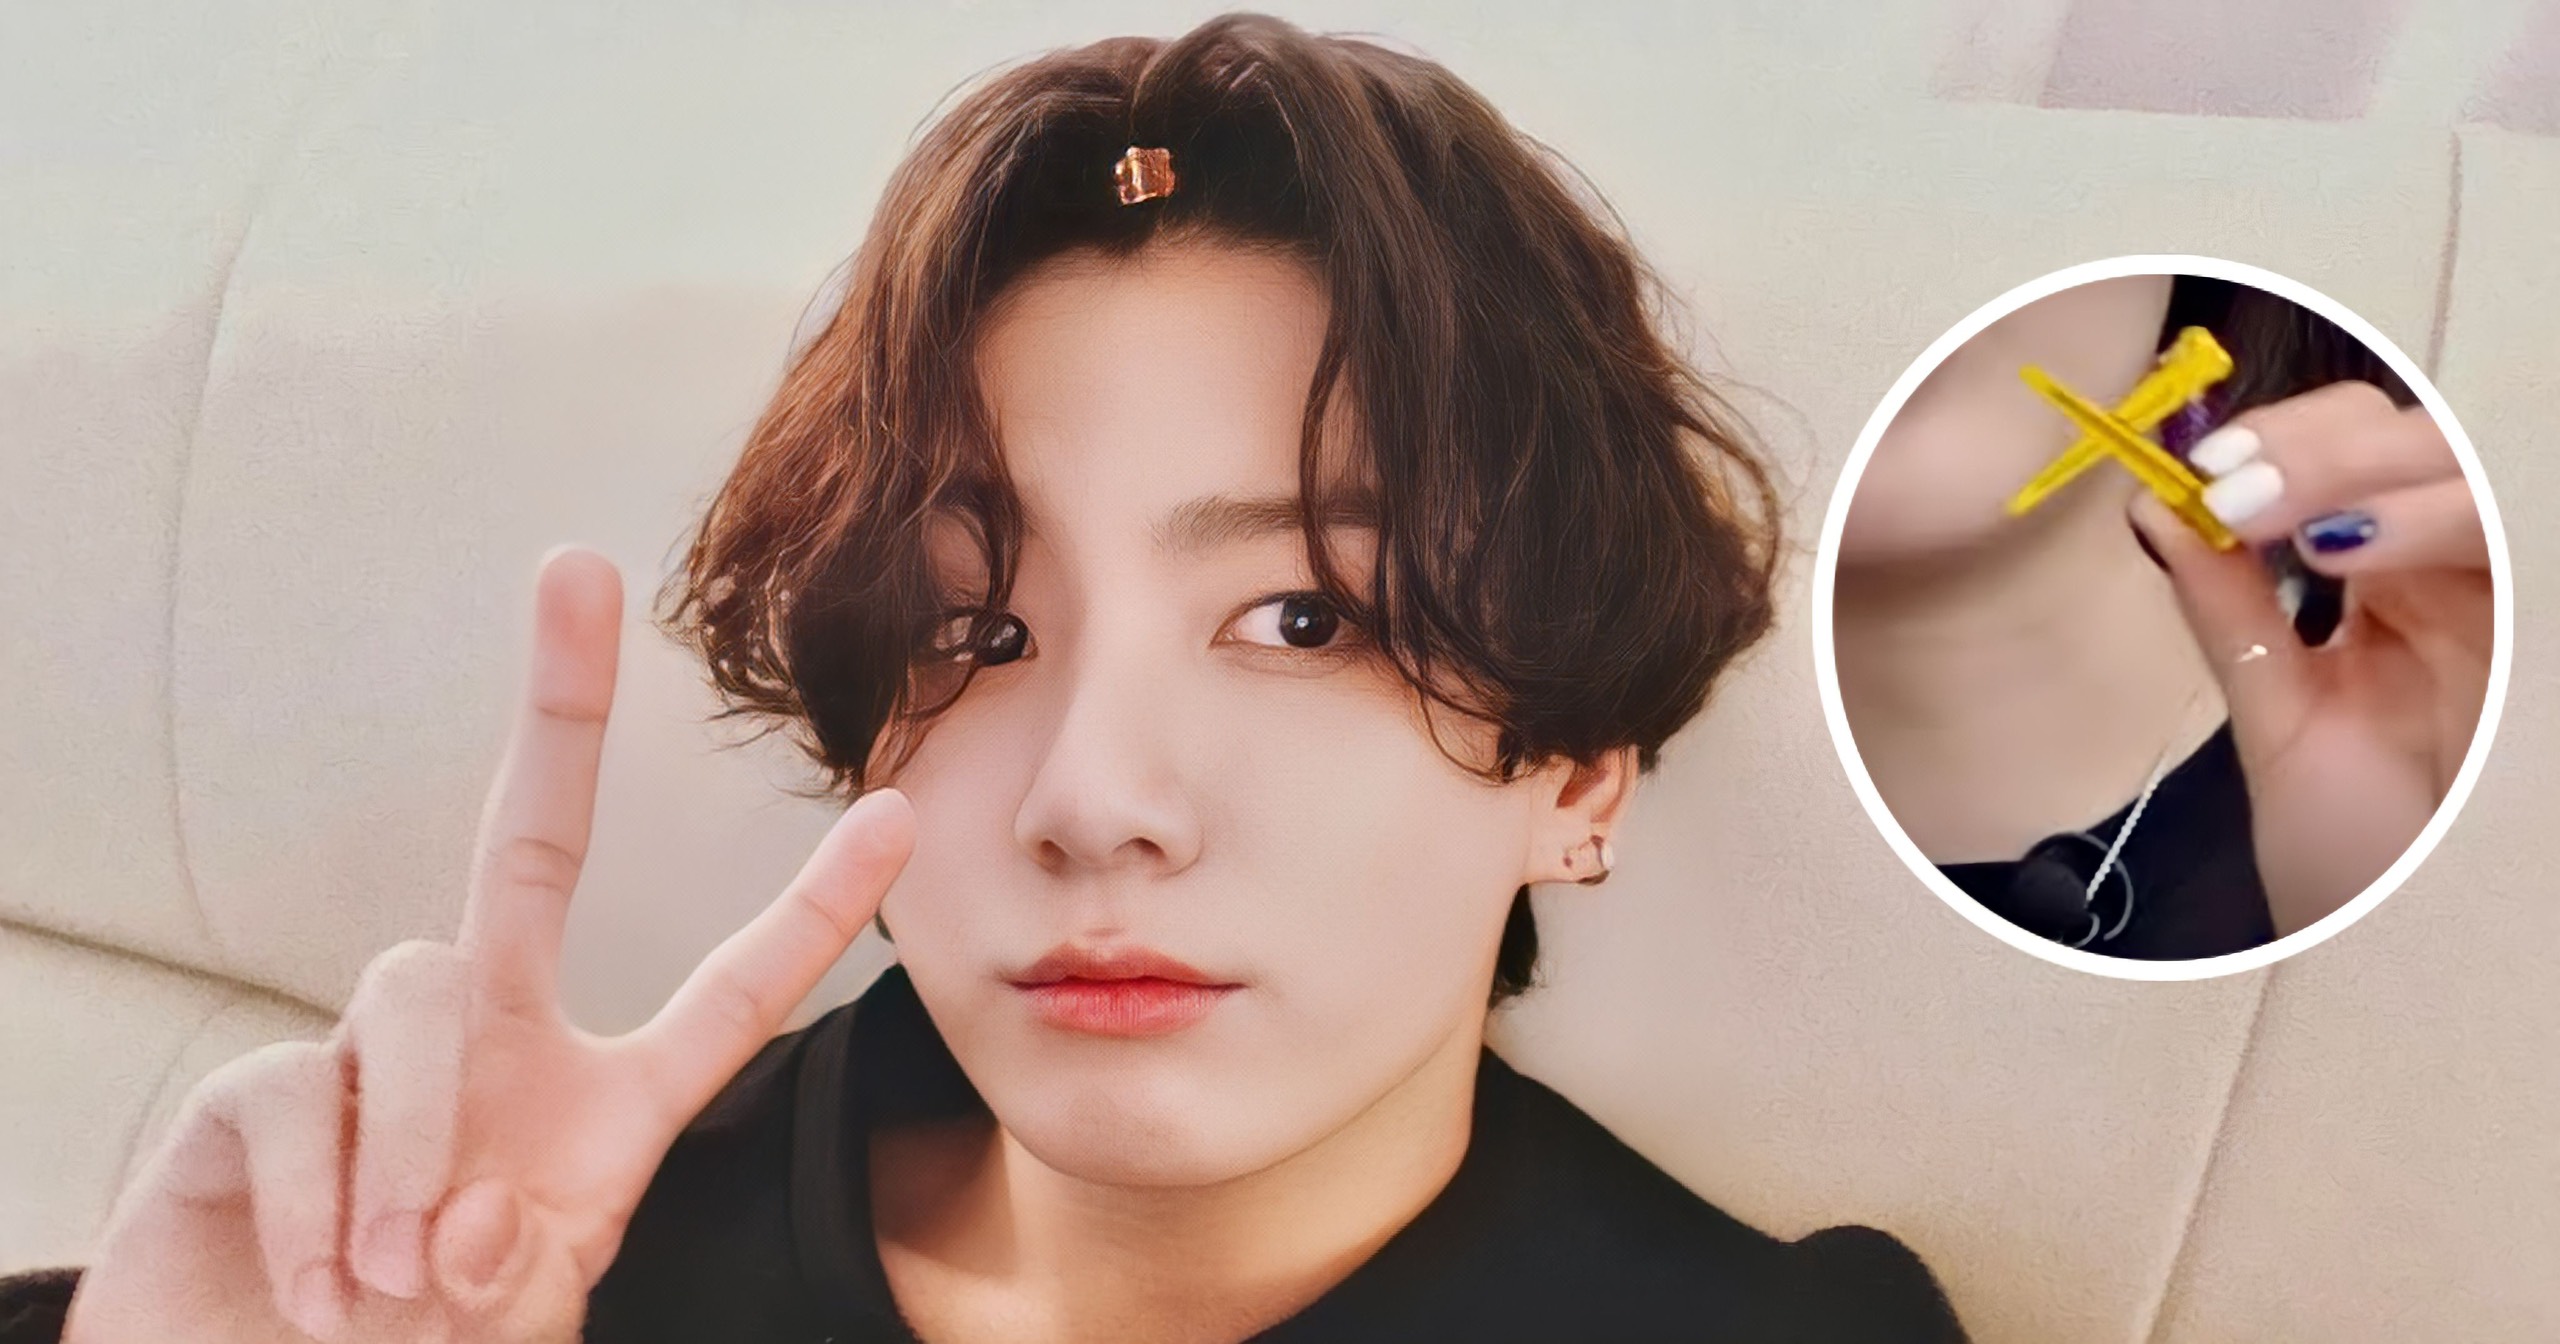 BTS’s Hairstylists Spill The Secret Behind Putting Clips In Their Hair